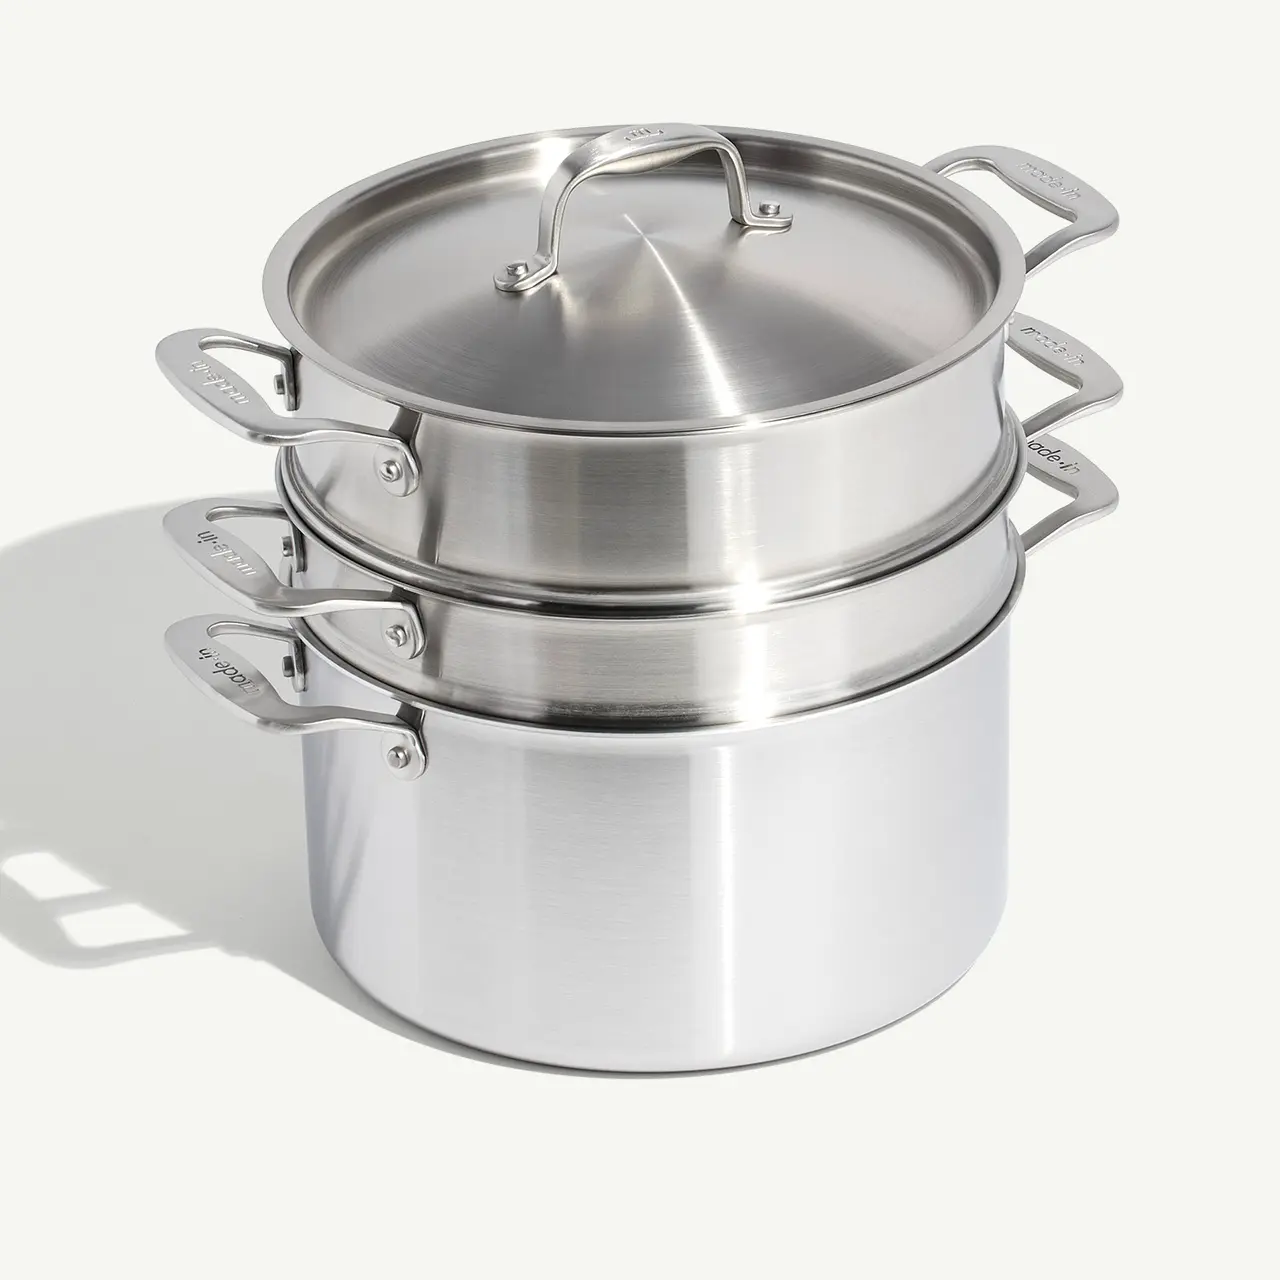 Stacked stainless steel pots with lids, showcasing cookware design.